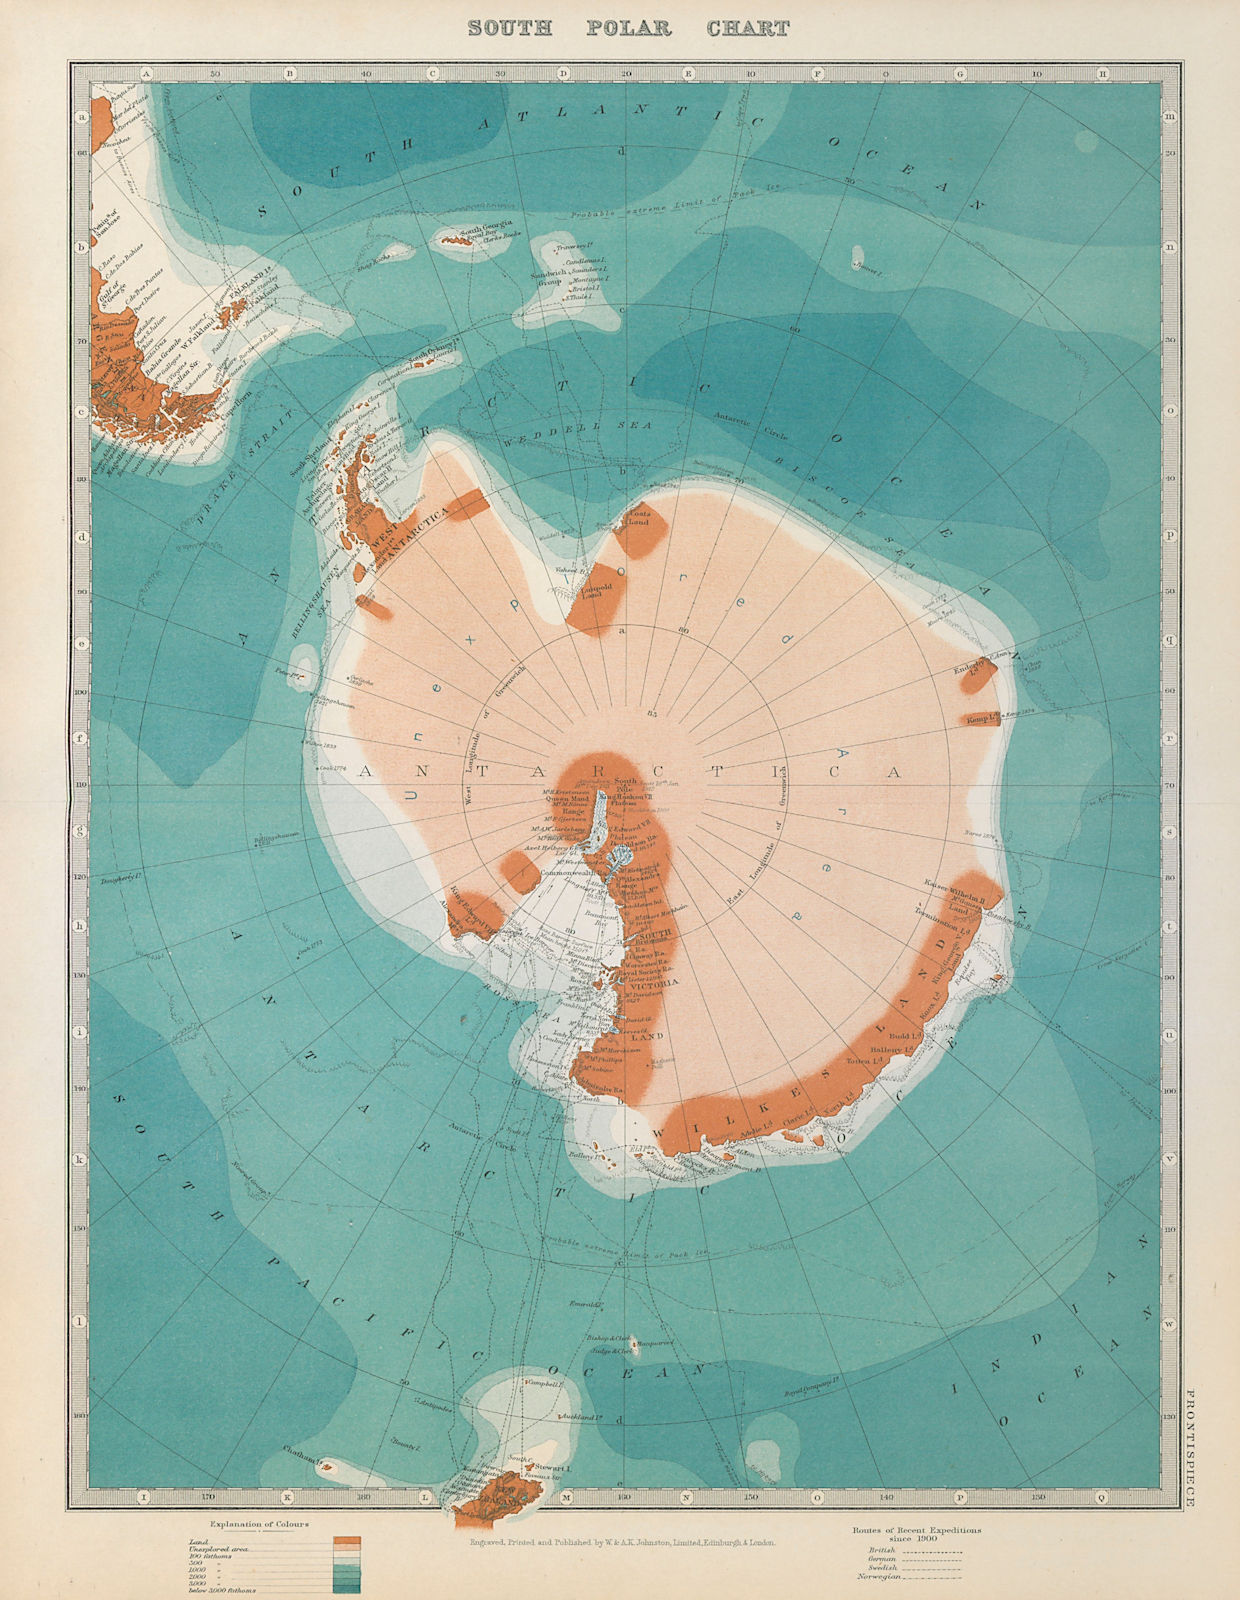 ANTARCTIC. Shows Amundsen reached South Pole in 1911. JOHNSTON 1915 old map